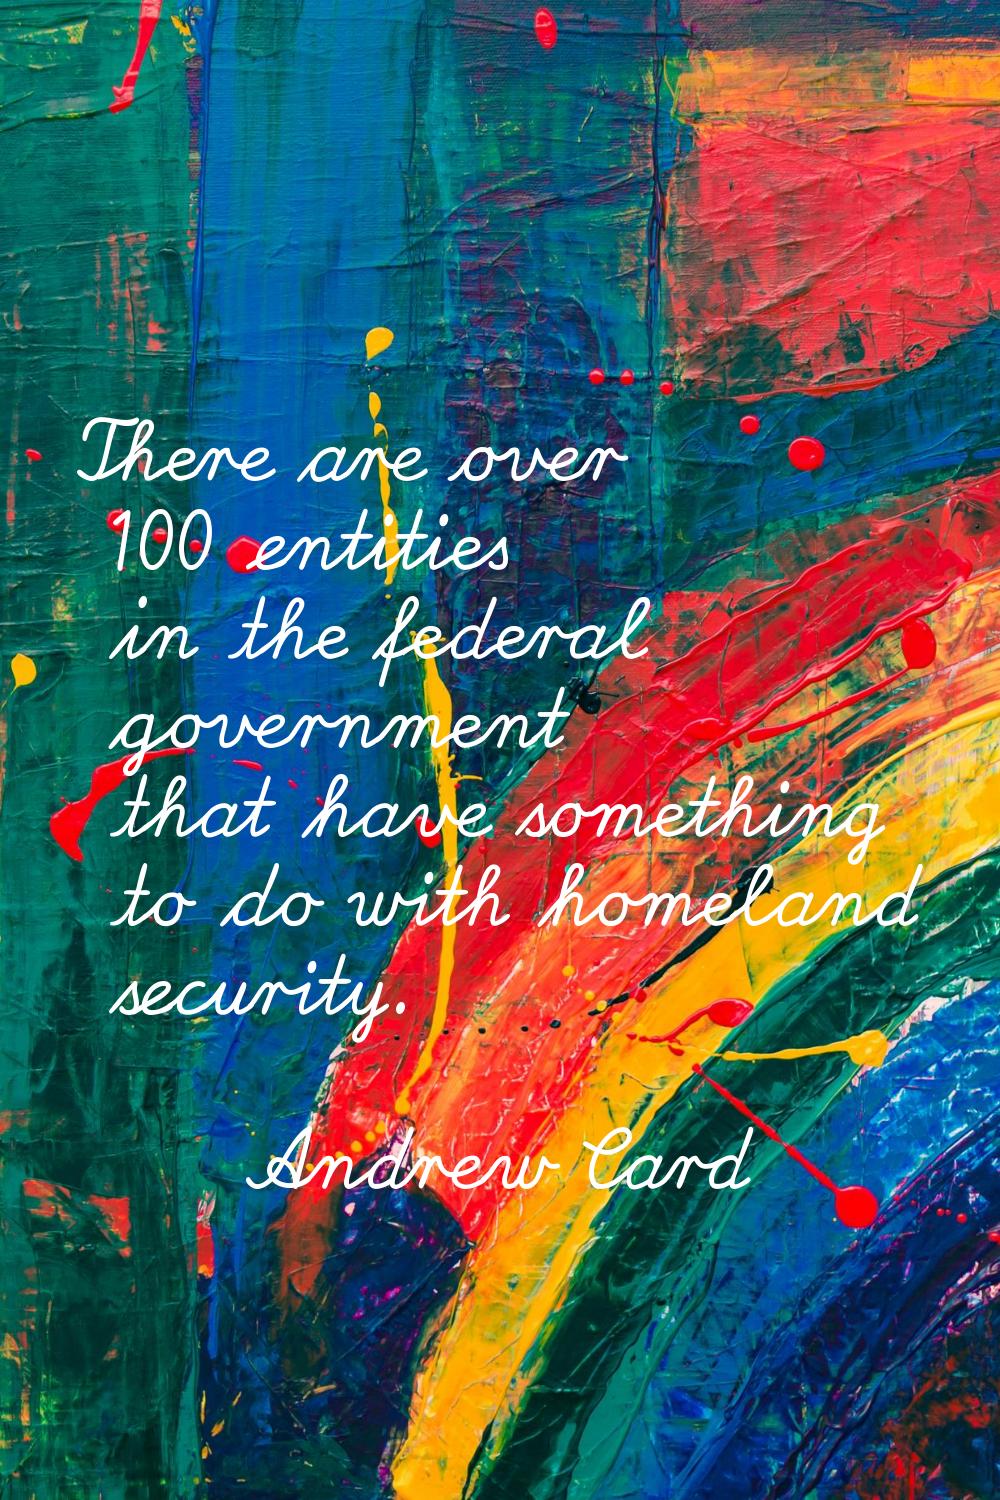 There are over 100 entities in the federal government that have something to do with homeland secur